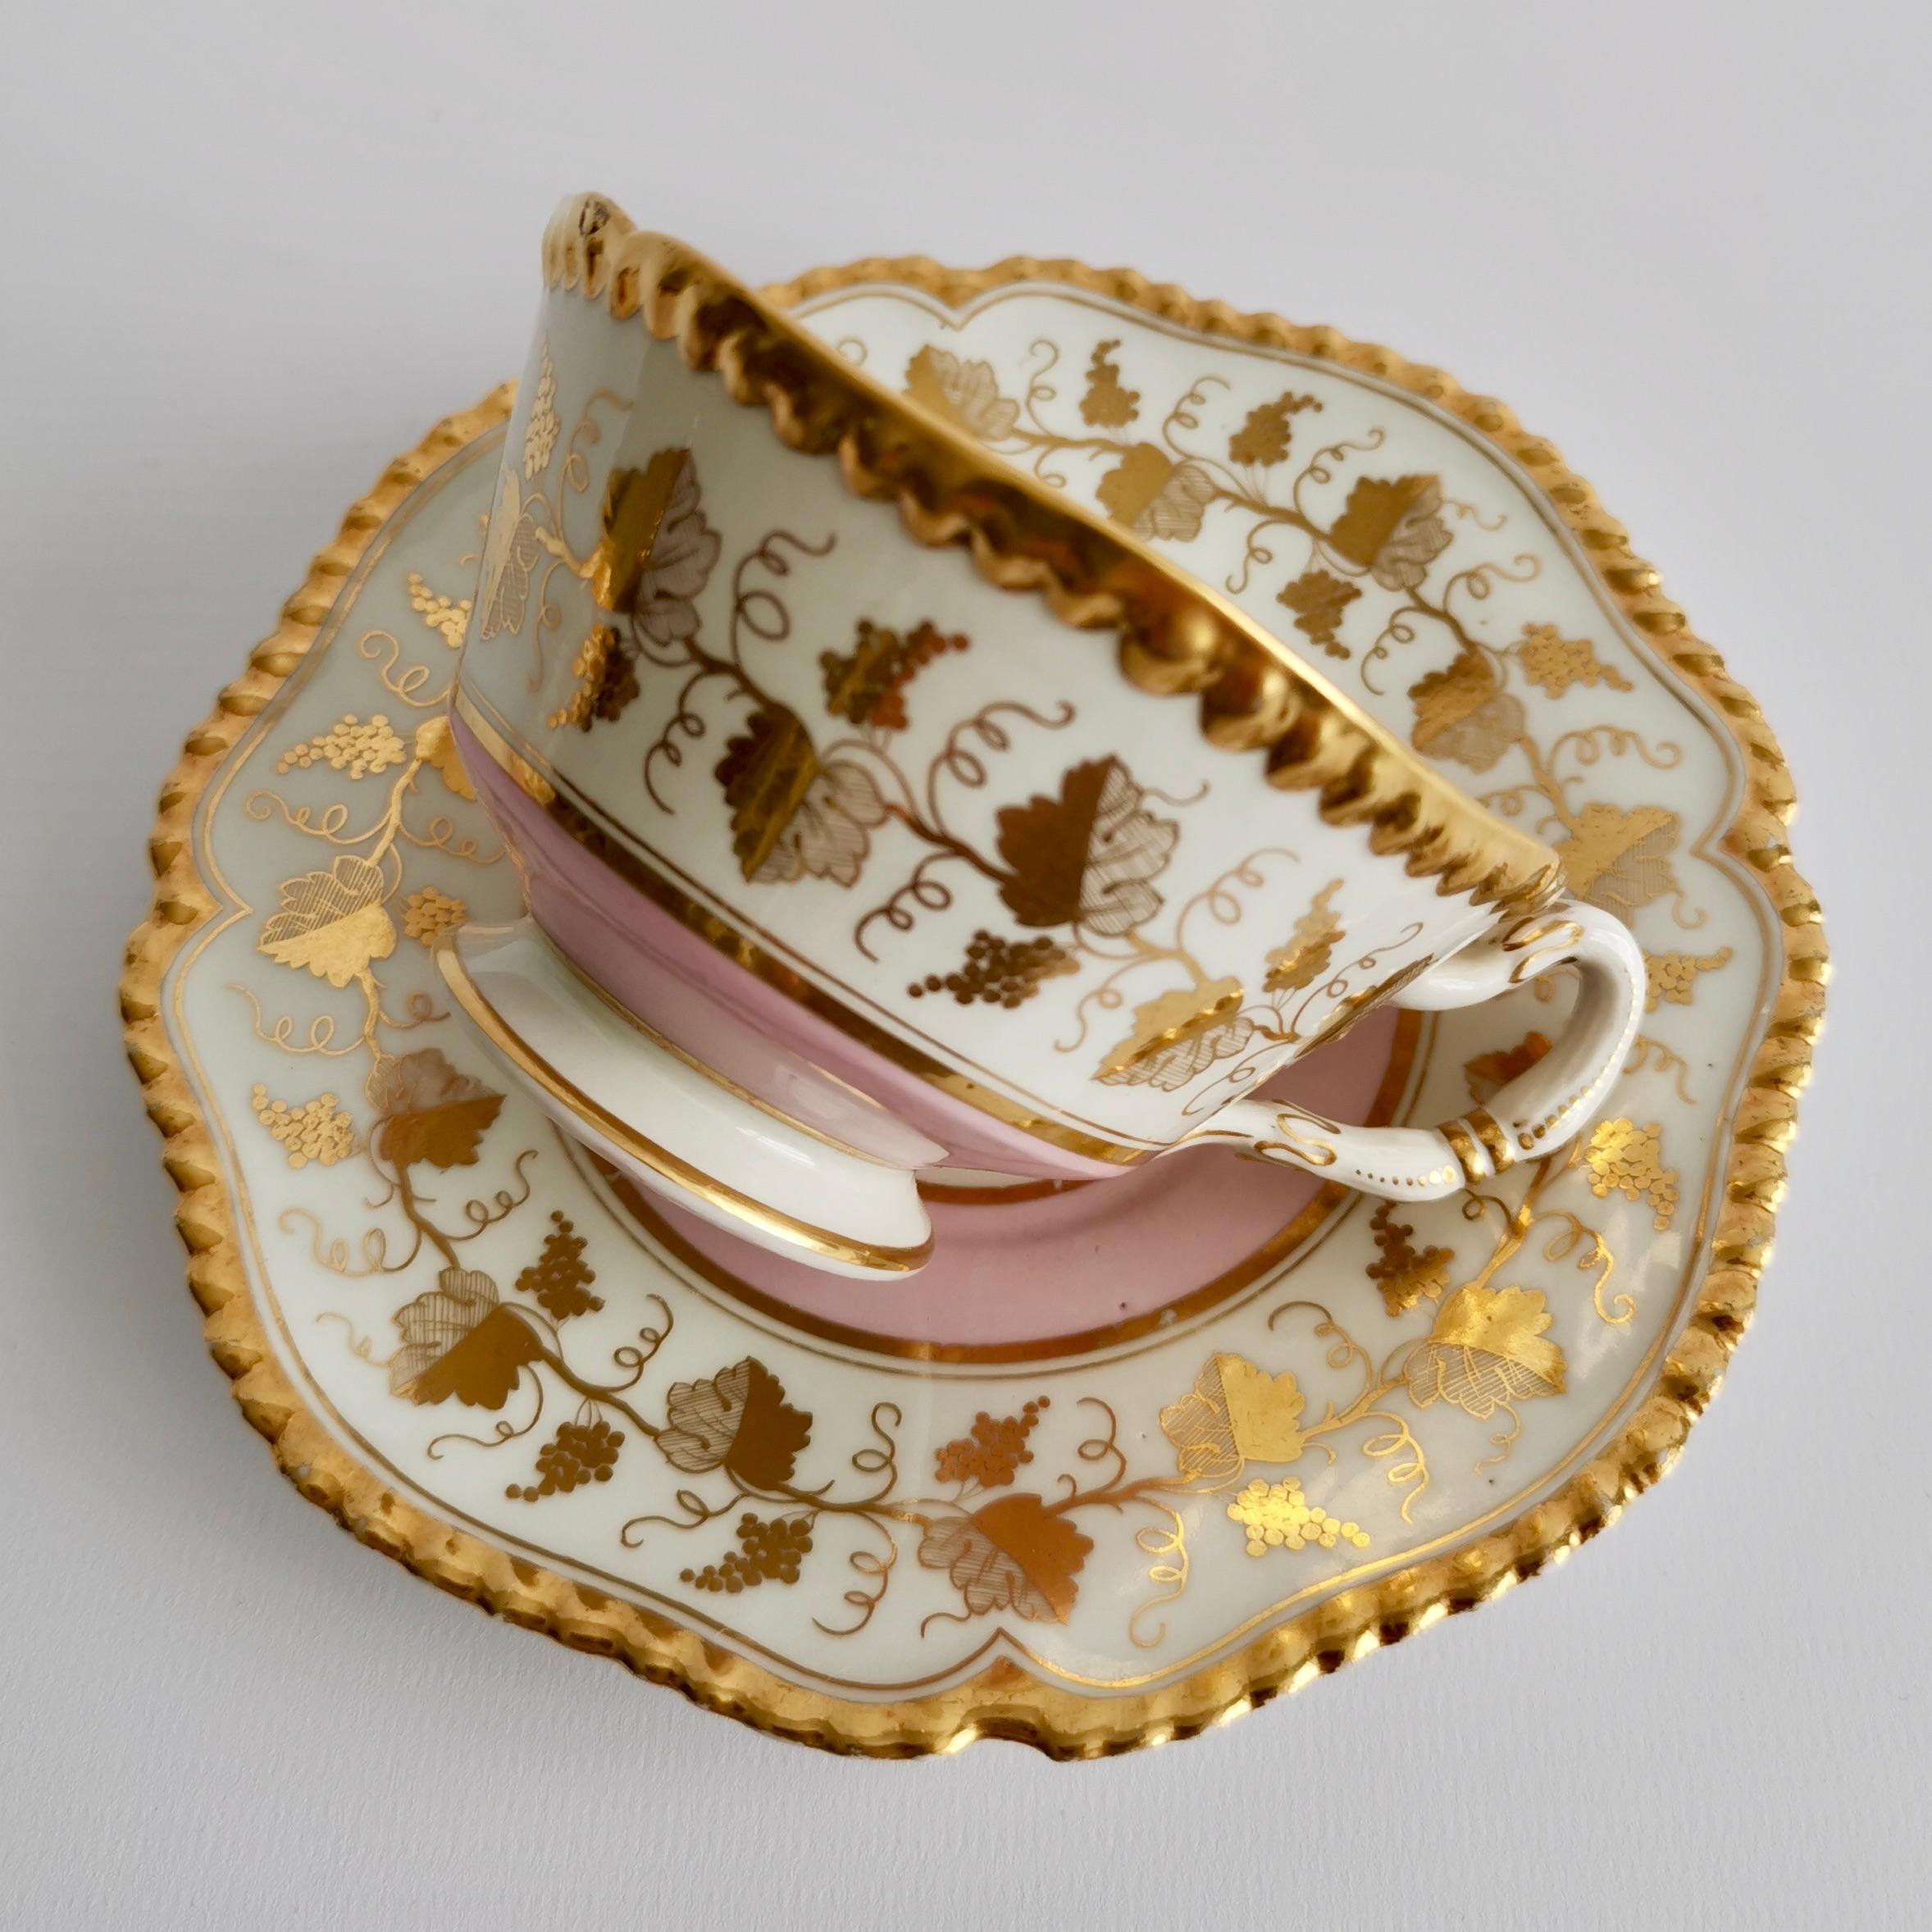 Hand-Painted Flight Barr & Barr Teacup Trio, Pink with Gilt Vines, 1815-1820